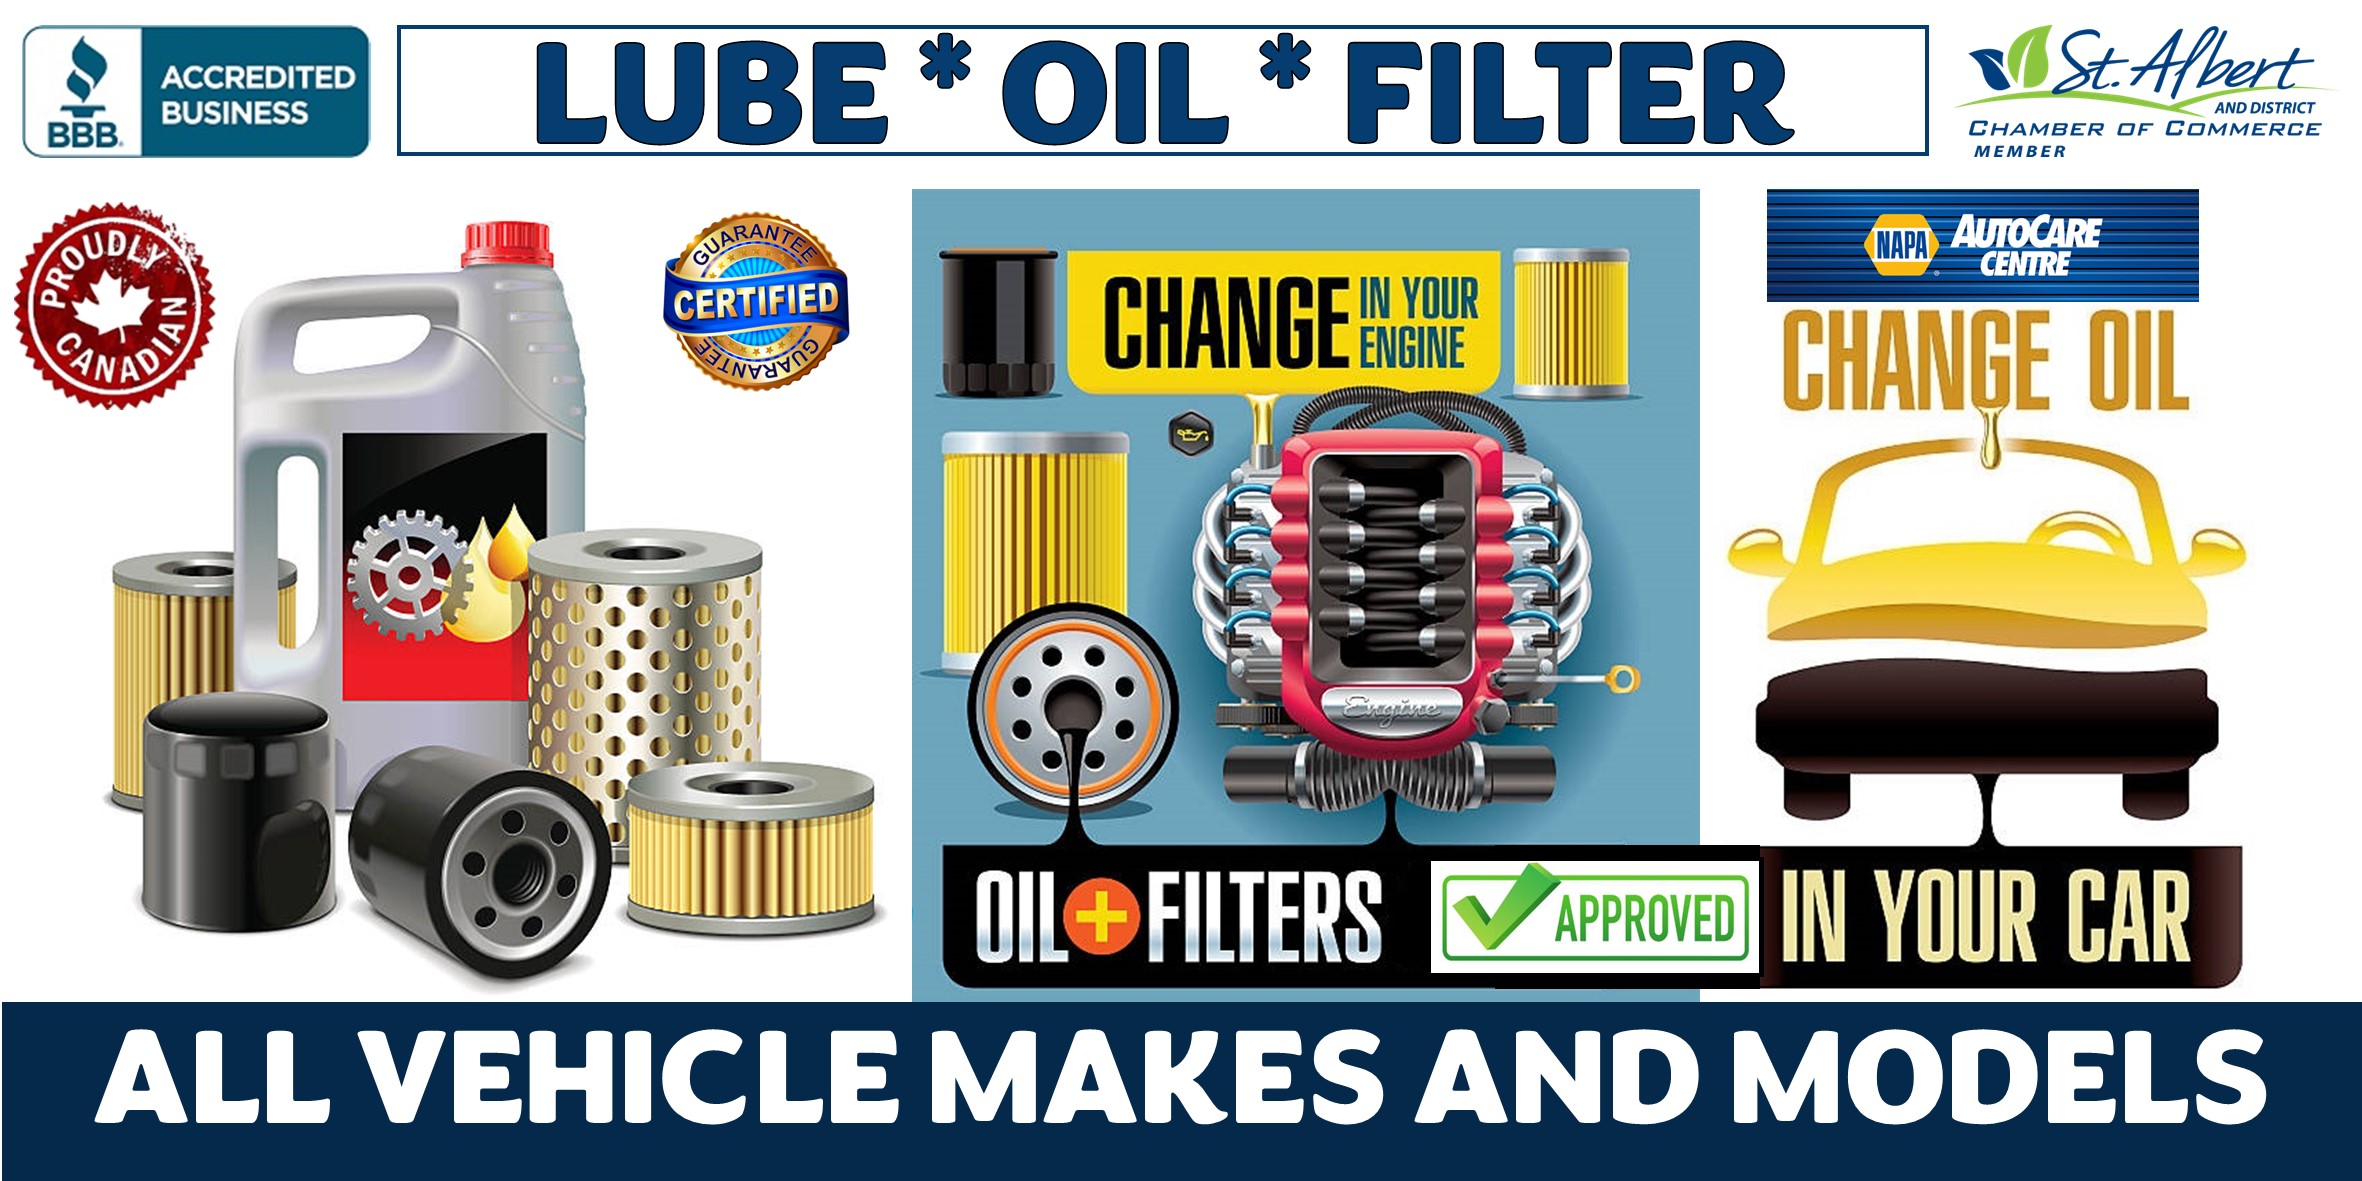 Full-service oil changes